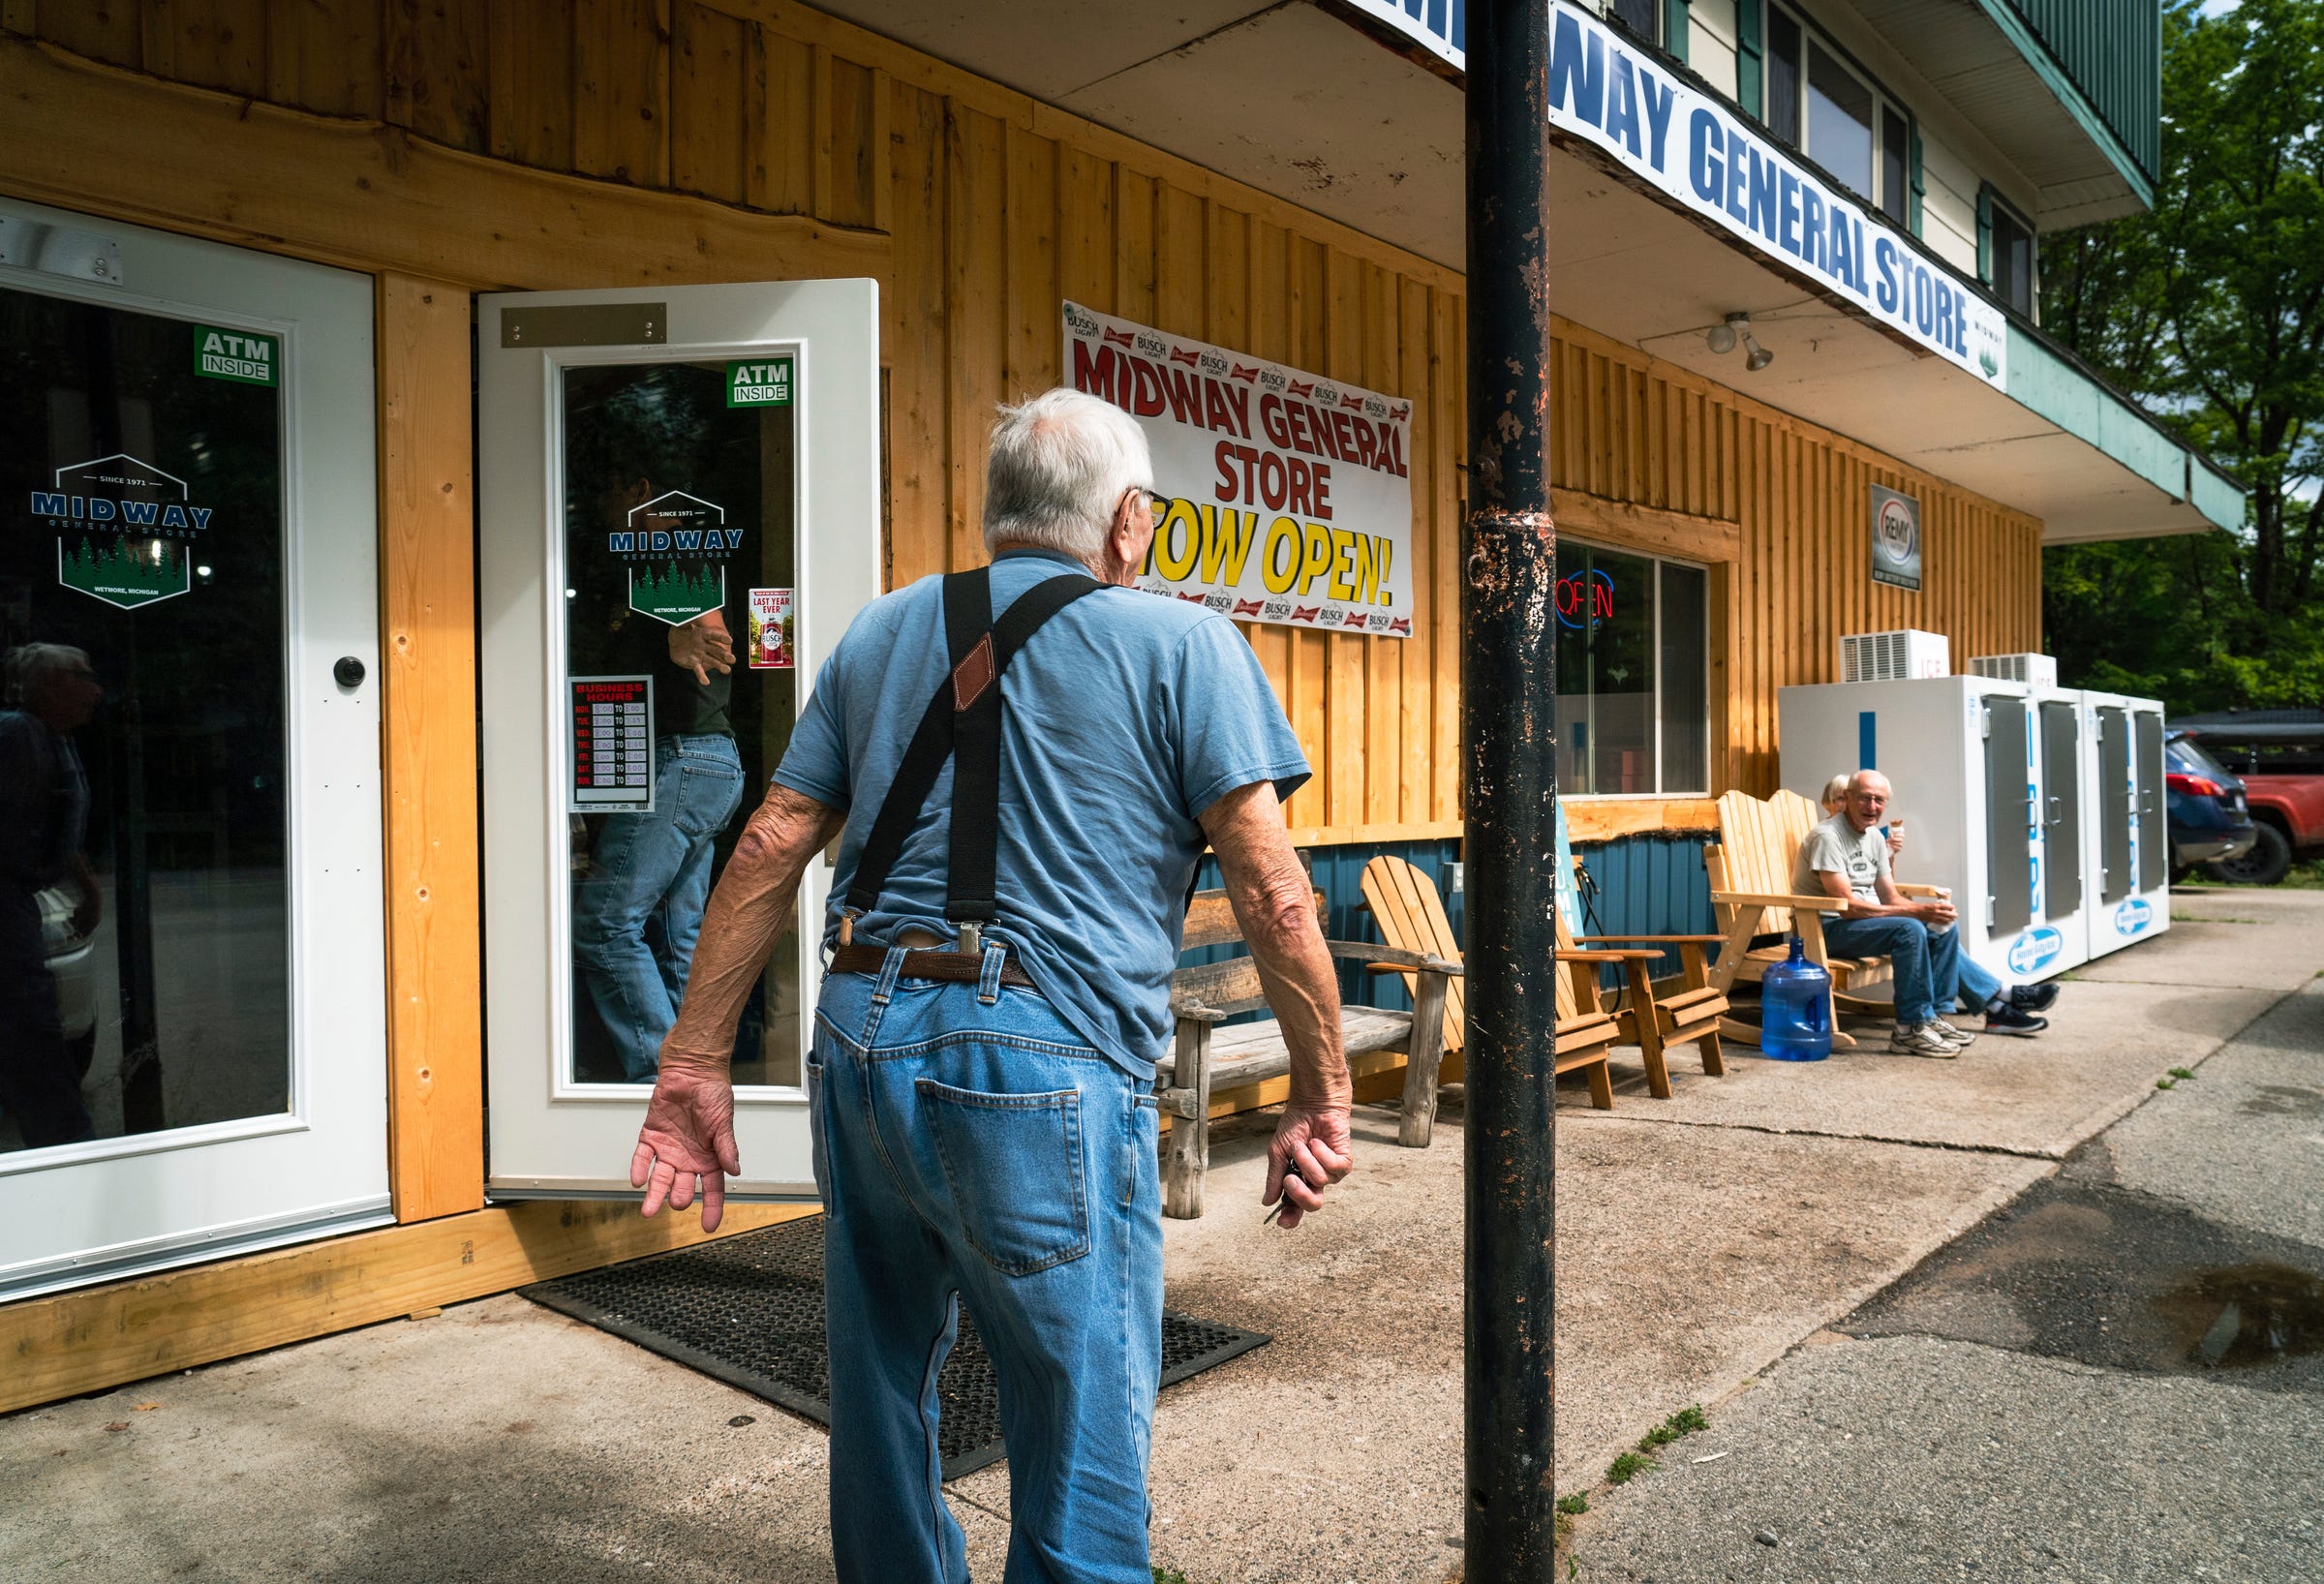 Mailman Ron Curtis, 86, makes his way into Midway General Store in Wetmore, which he once owned along with five hunters' cabins, in Wetmore in Michigan's Upper Peninsula on Wednesday, July 27, 2022.